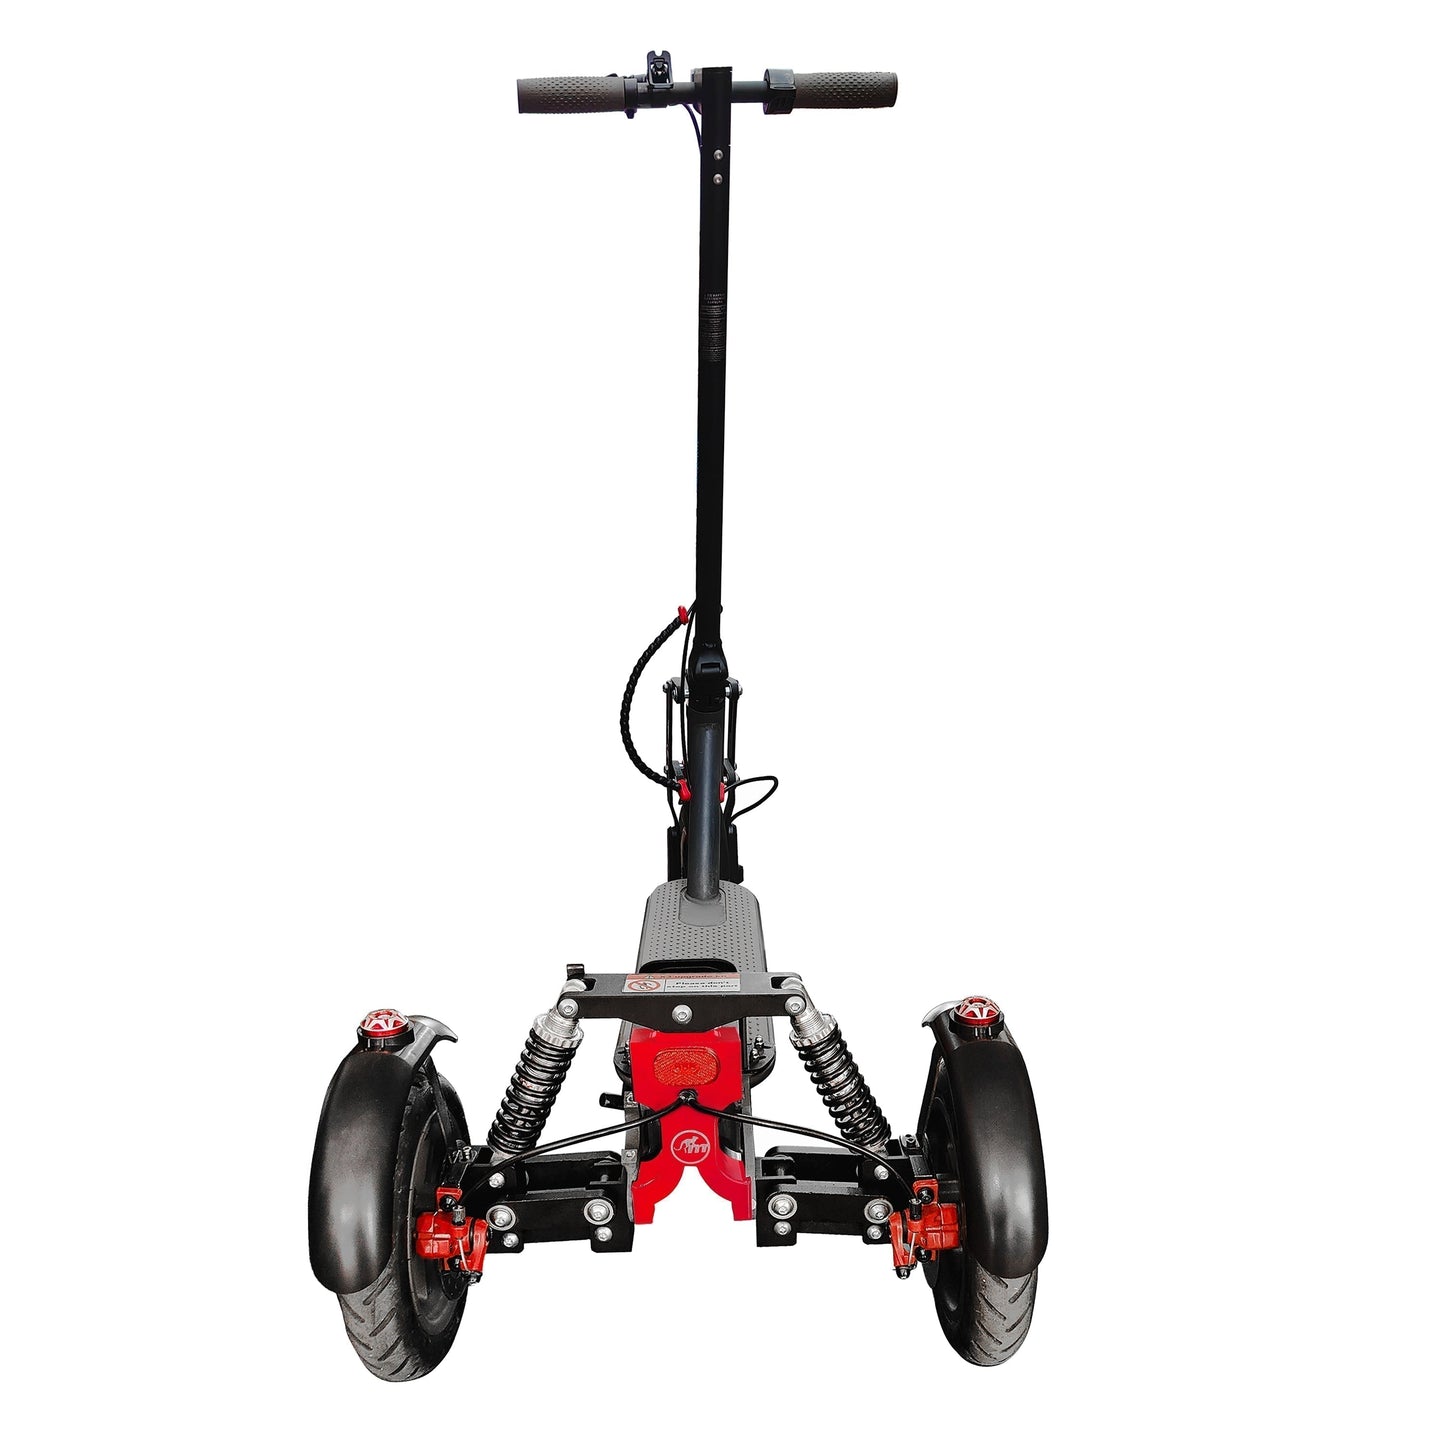 Monorim X3 upgrade kit to be Three wheels special for Flyebike H-1 Scooter